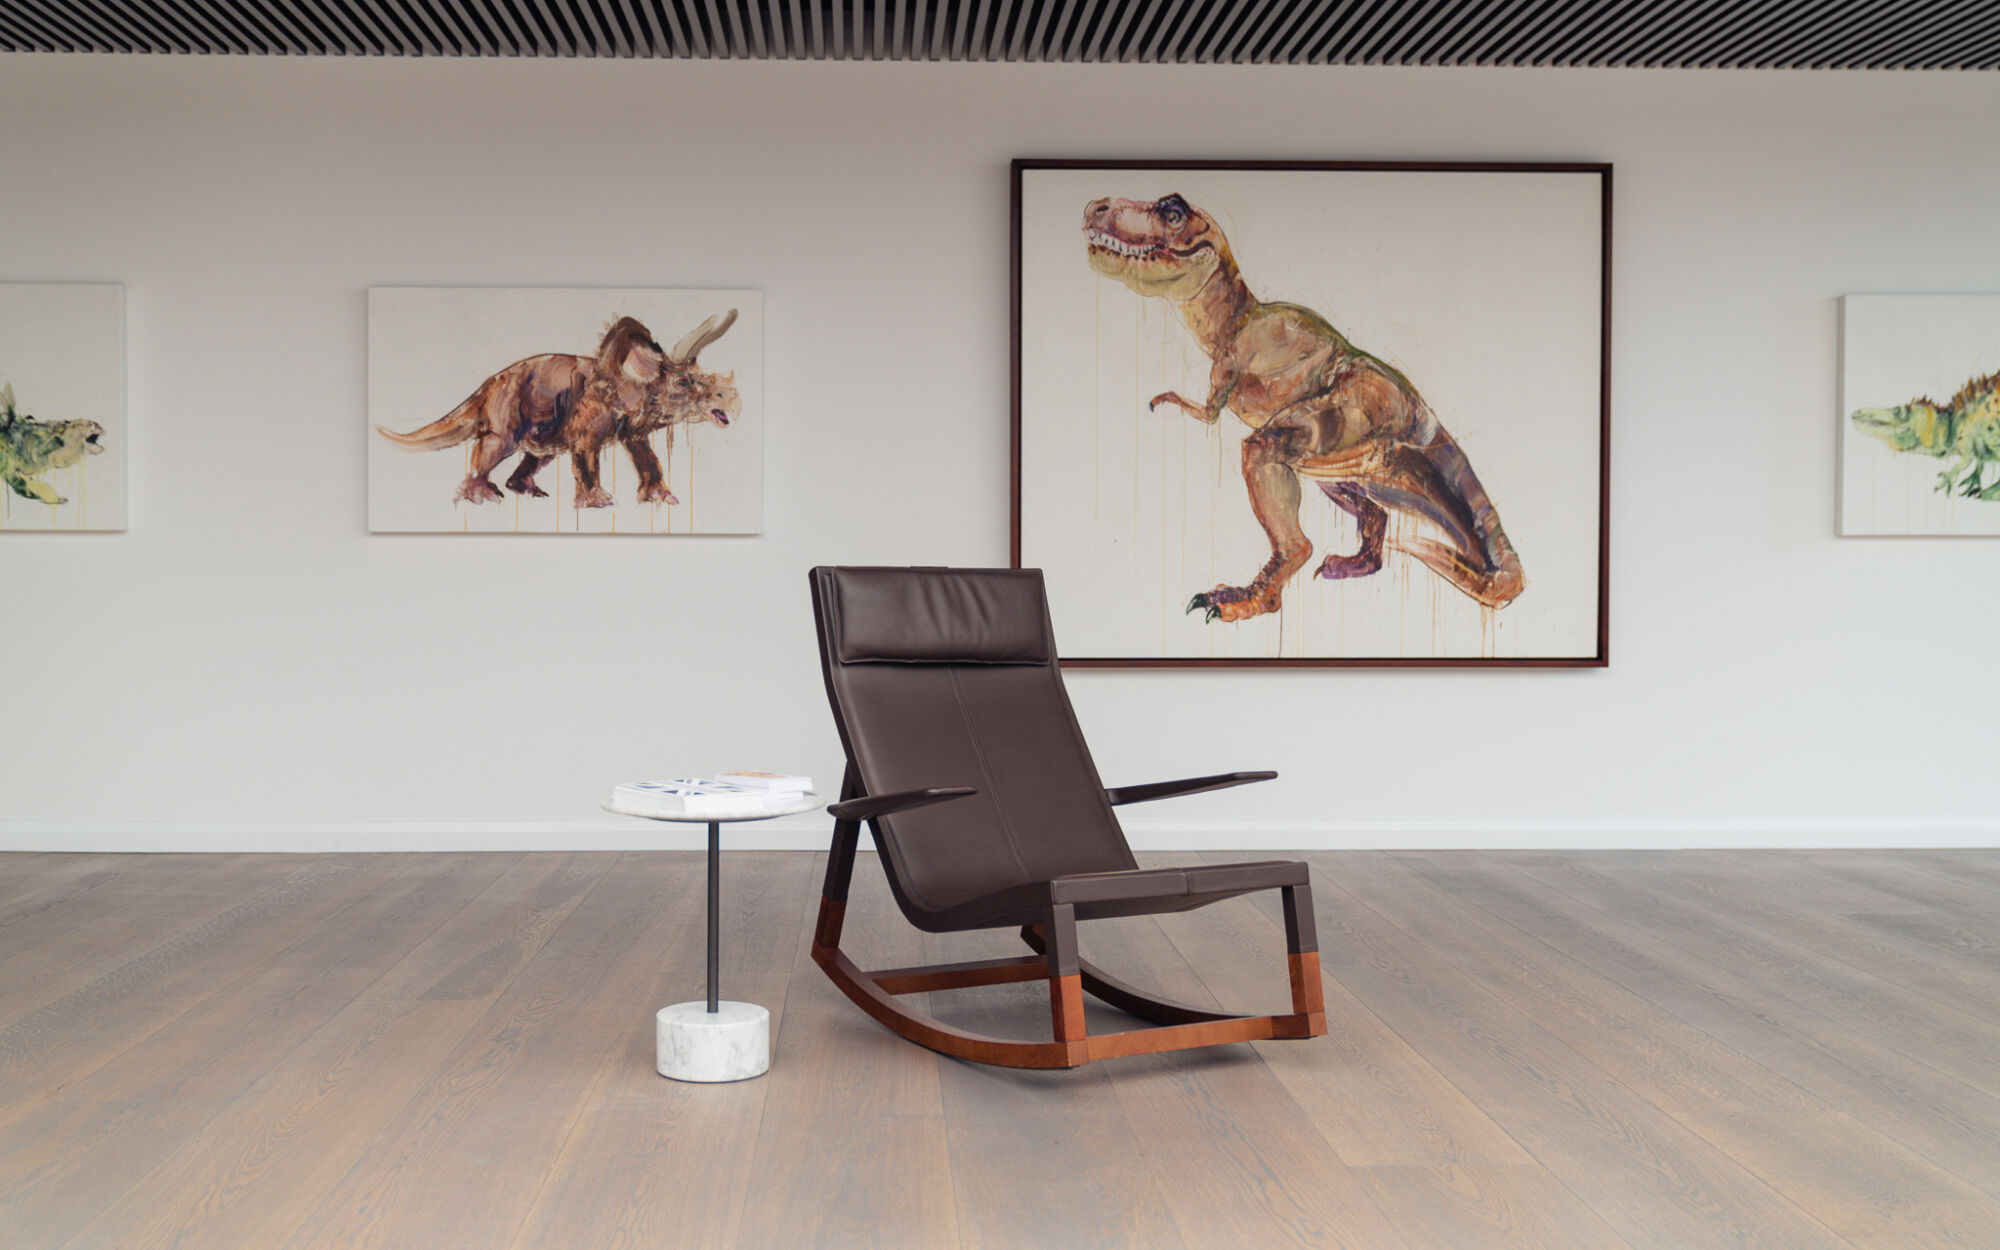 The Wick - 'Dave White: Extinct' at Kiklo Spaces, photographer: Henry Wood, courtesy of Loughran Gallery 